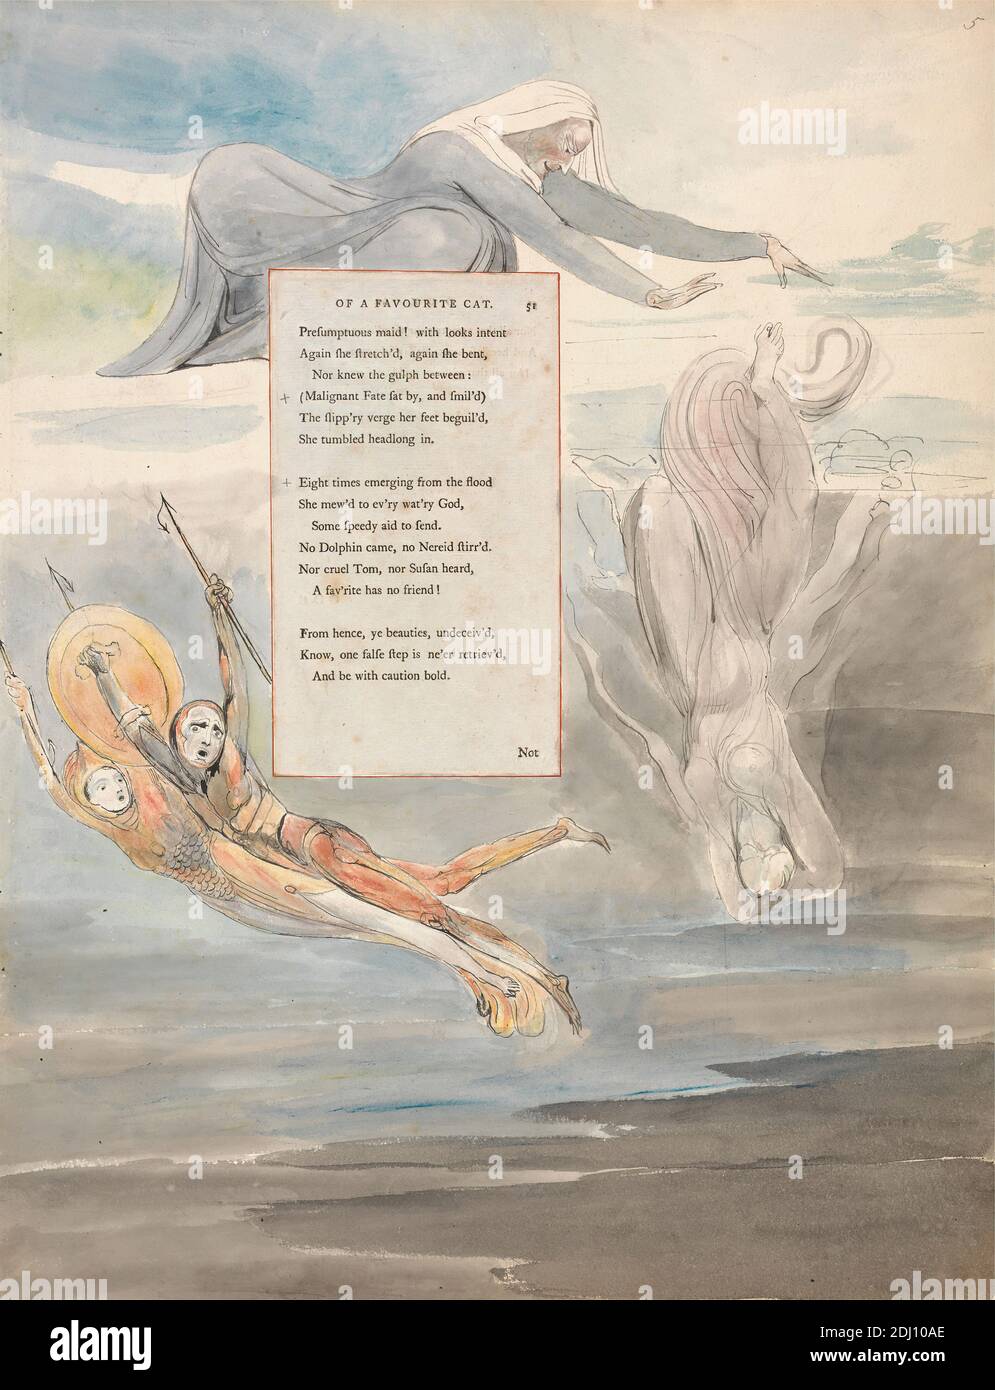 The Poems of Thomas Gray, Design 11, 'Ode on the Death of a Favourite Cat.', William Blake, 1757–1827, British, between 1797 and 1798, Watercolor with pen and black ink and graphite on moderately thick, slightly textured, cream wove paper with inlaid letterpress page, Sheet: 16 1/2 x 12 3/4 inches (41.9 x 32.4 cm), fish, fish hooks, harpoons, literary theme, religious and mythological subject, shield, spear, text, women Stock Photo